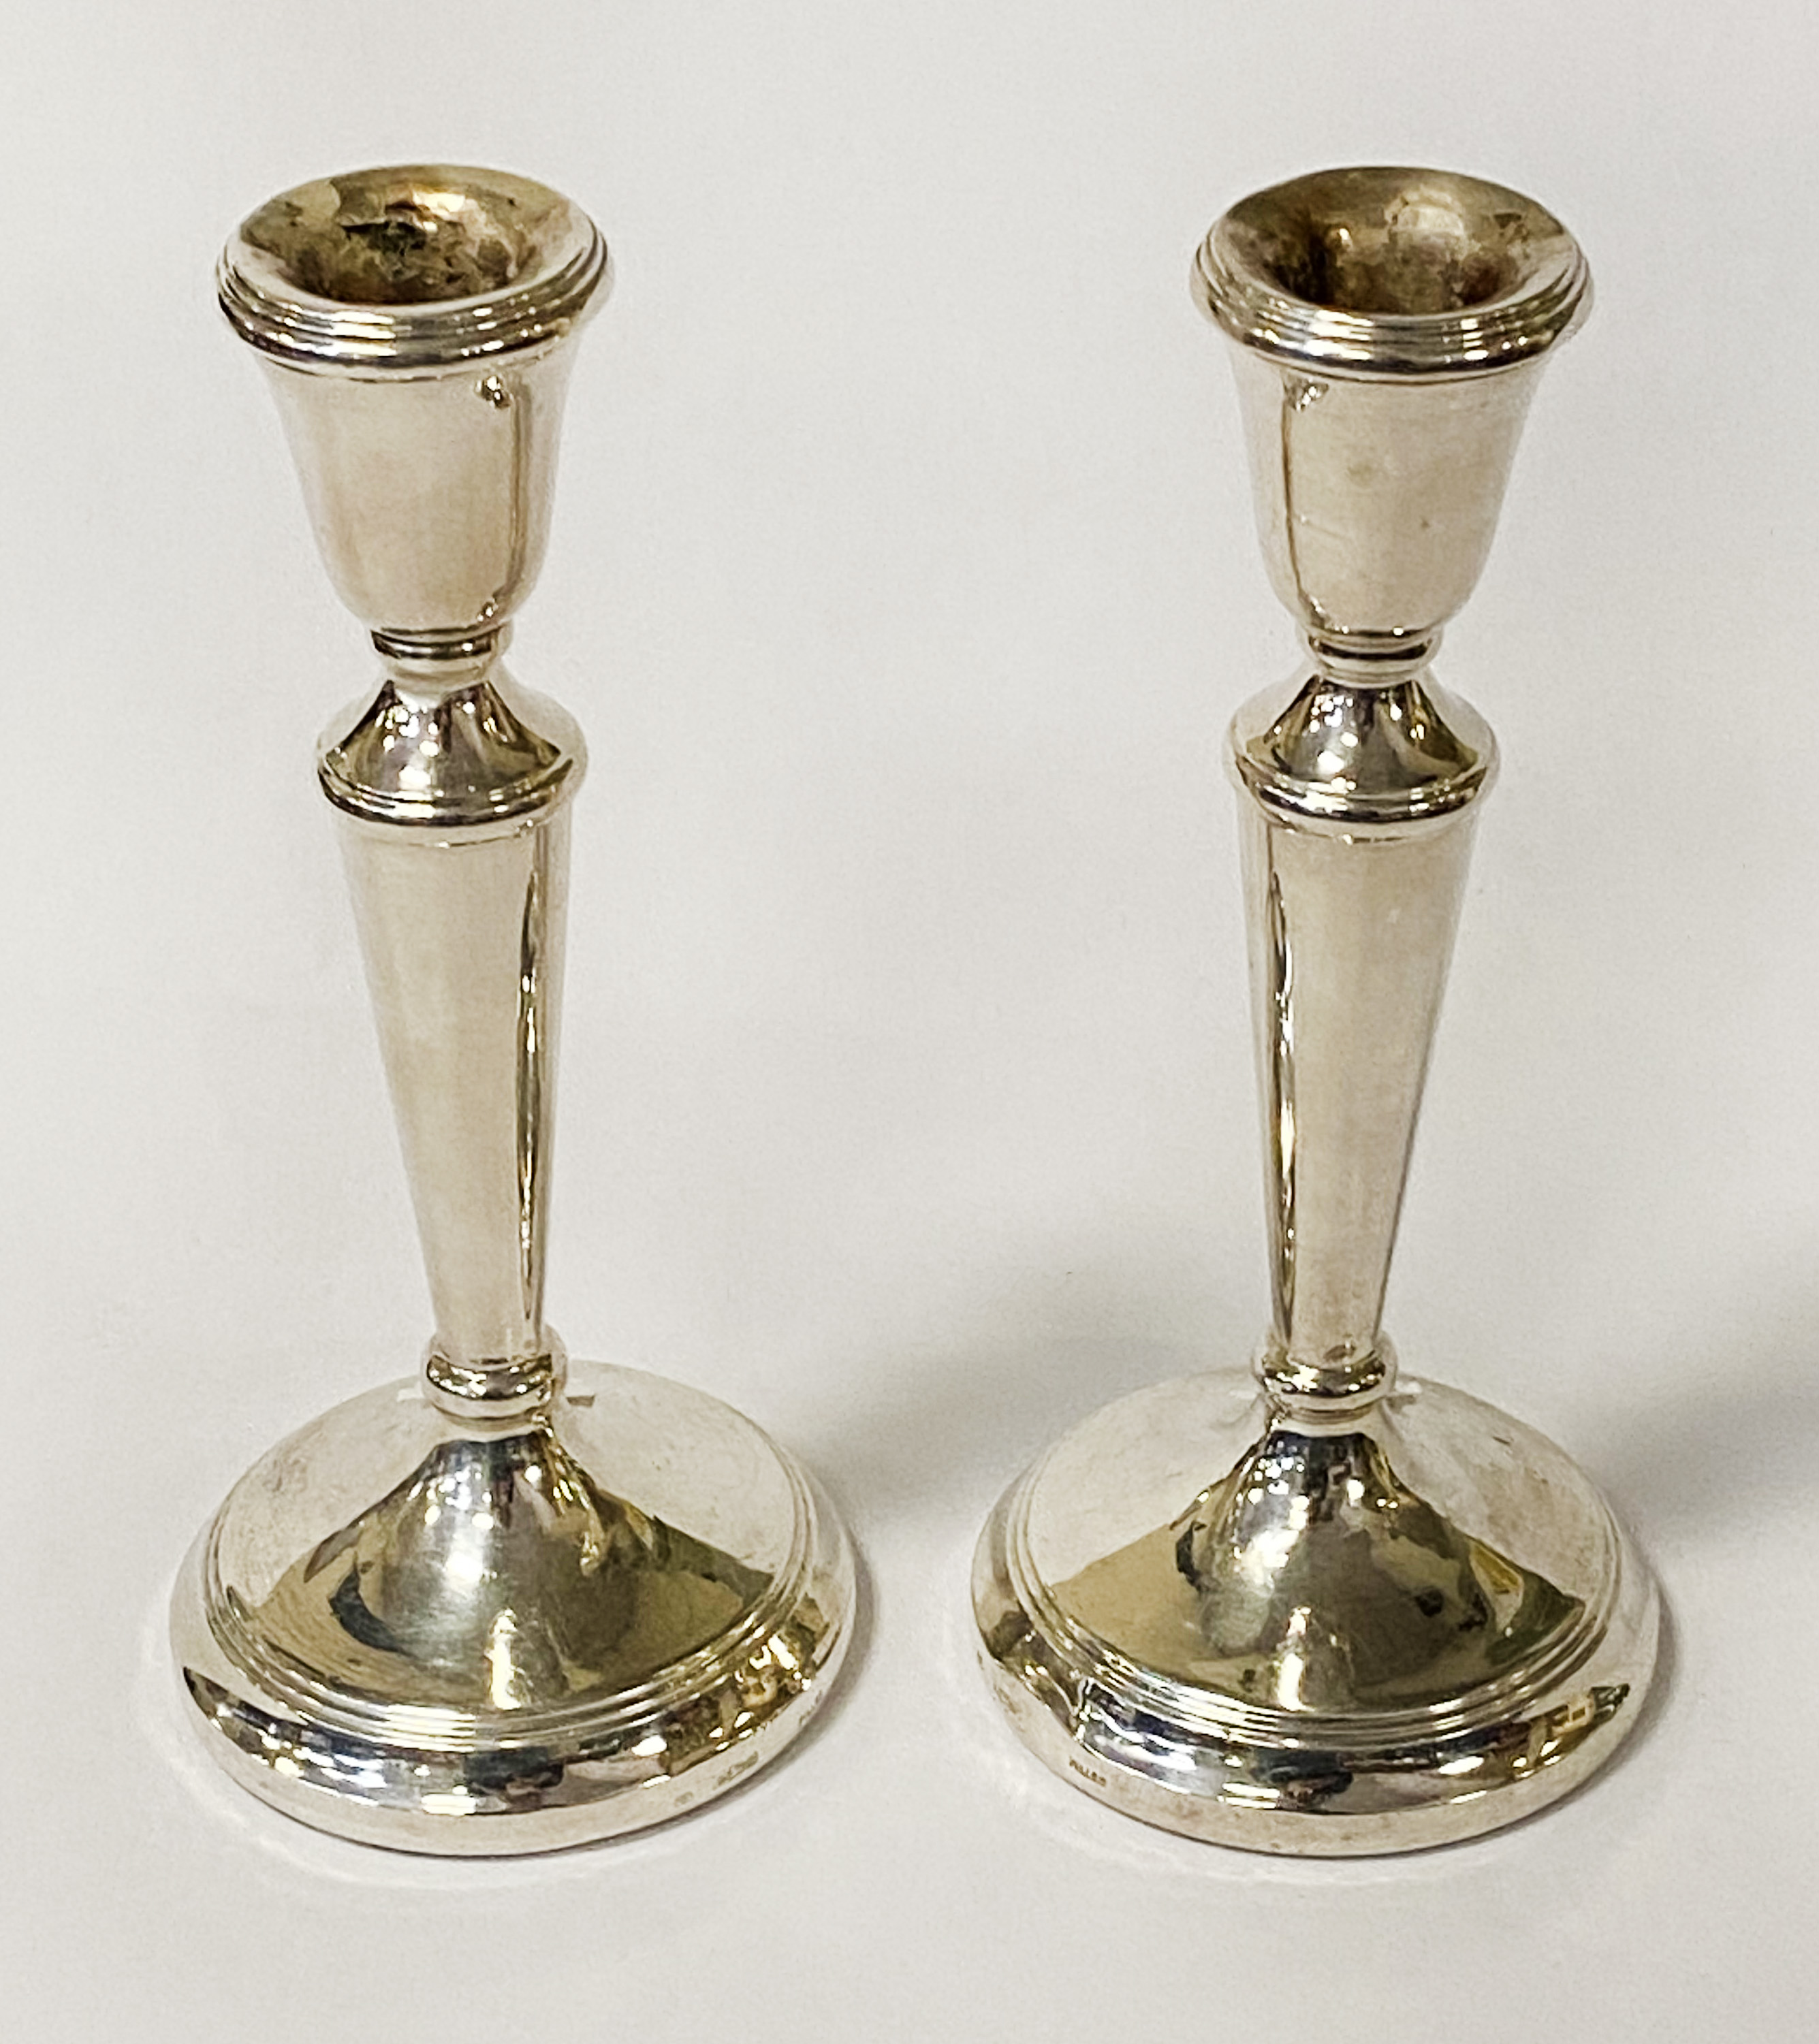 PAIR OF SILVER WEIGHTED CANDLESTICKS 19CM (H)